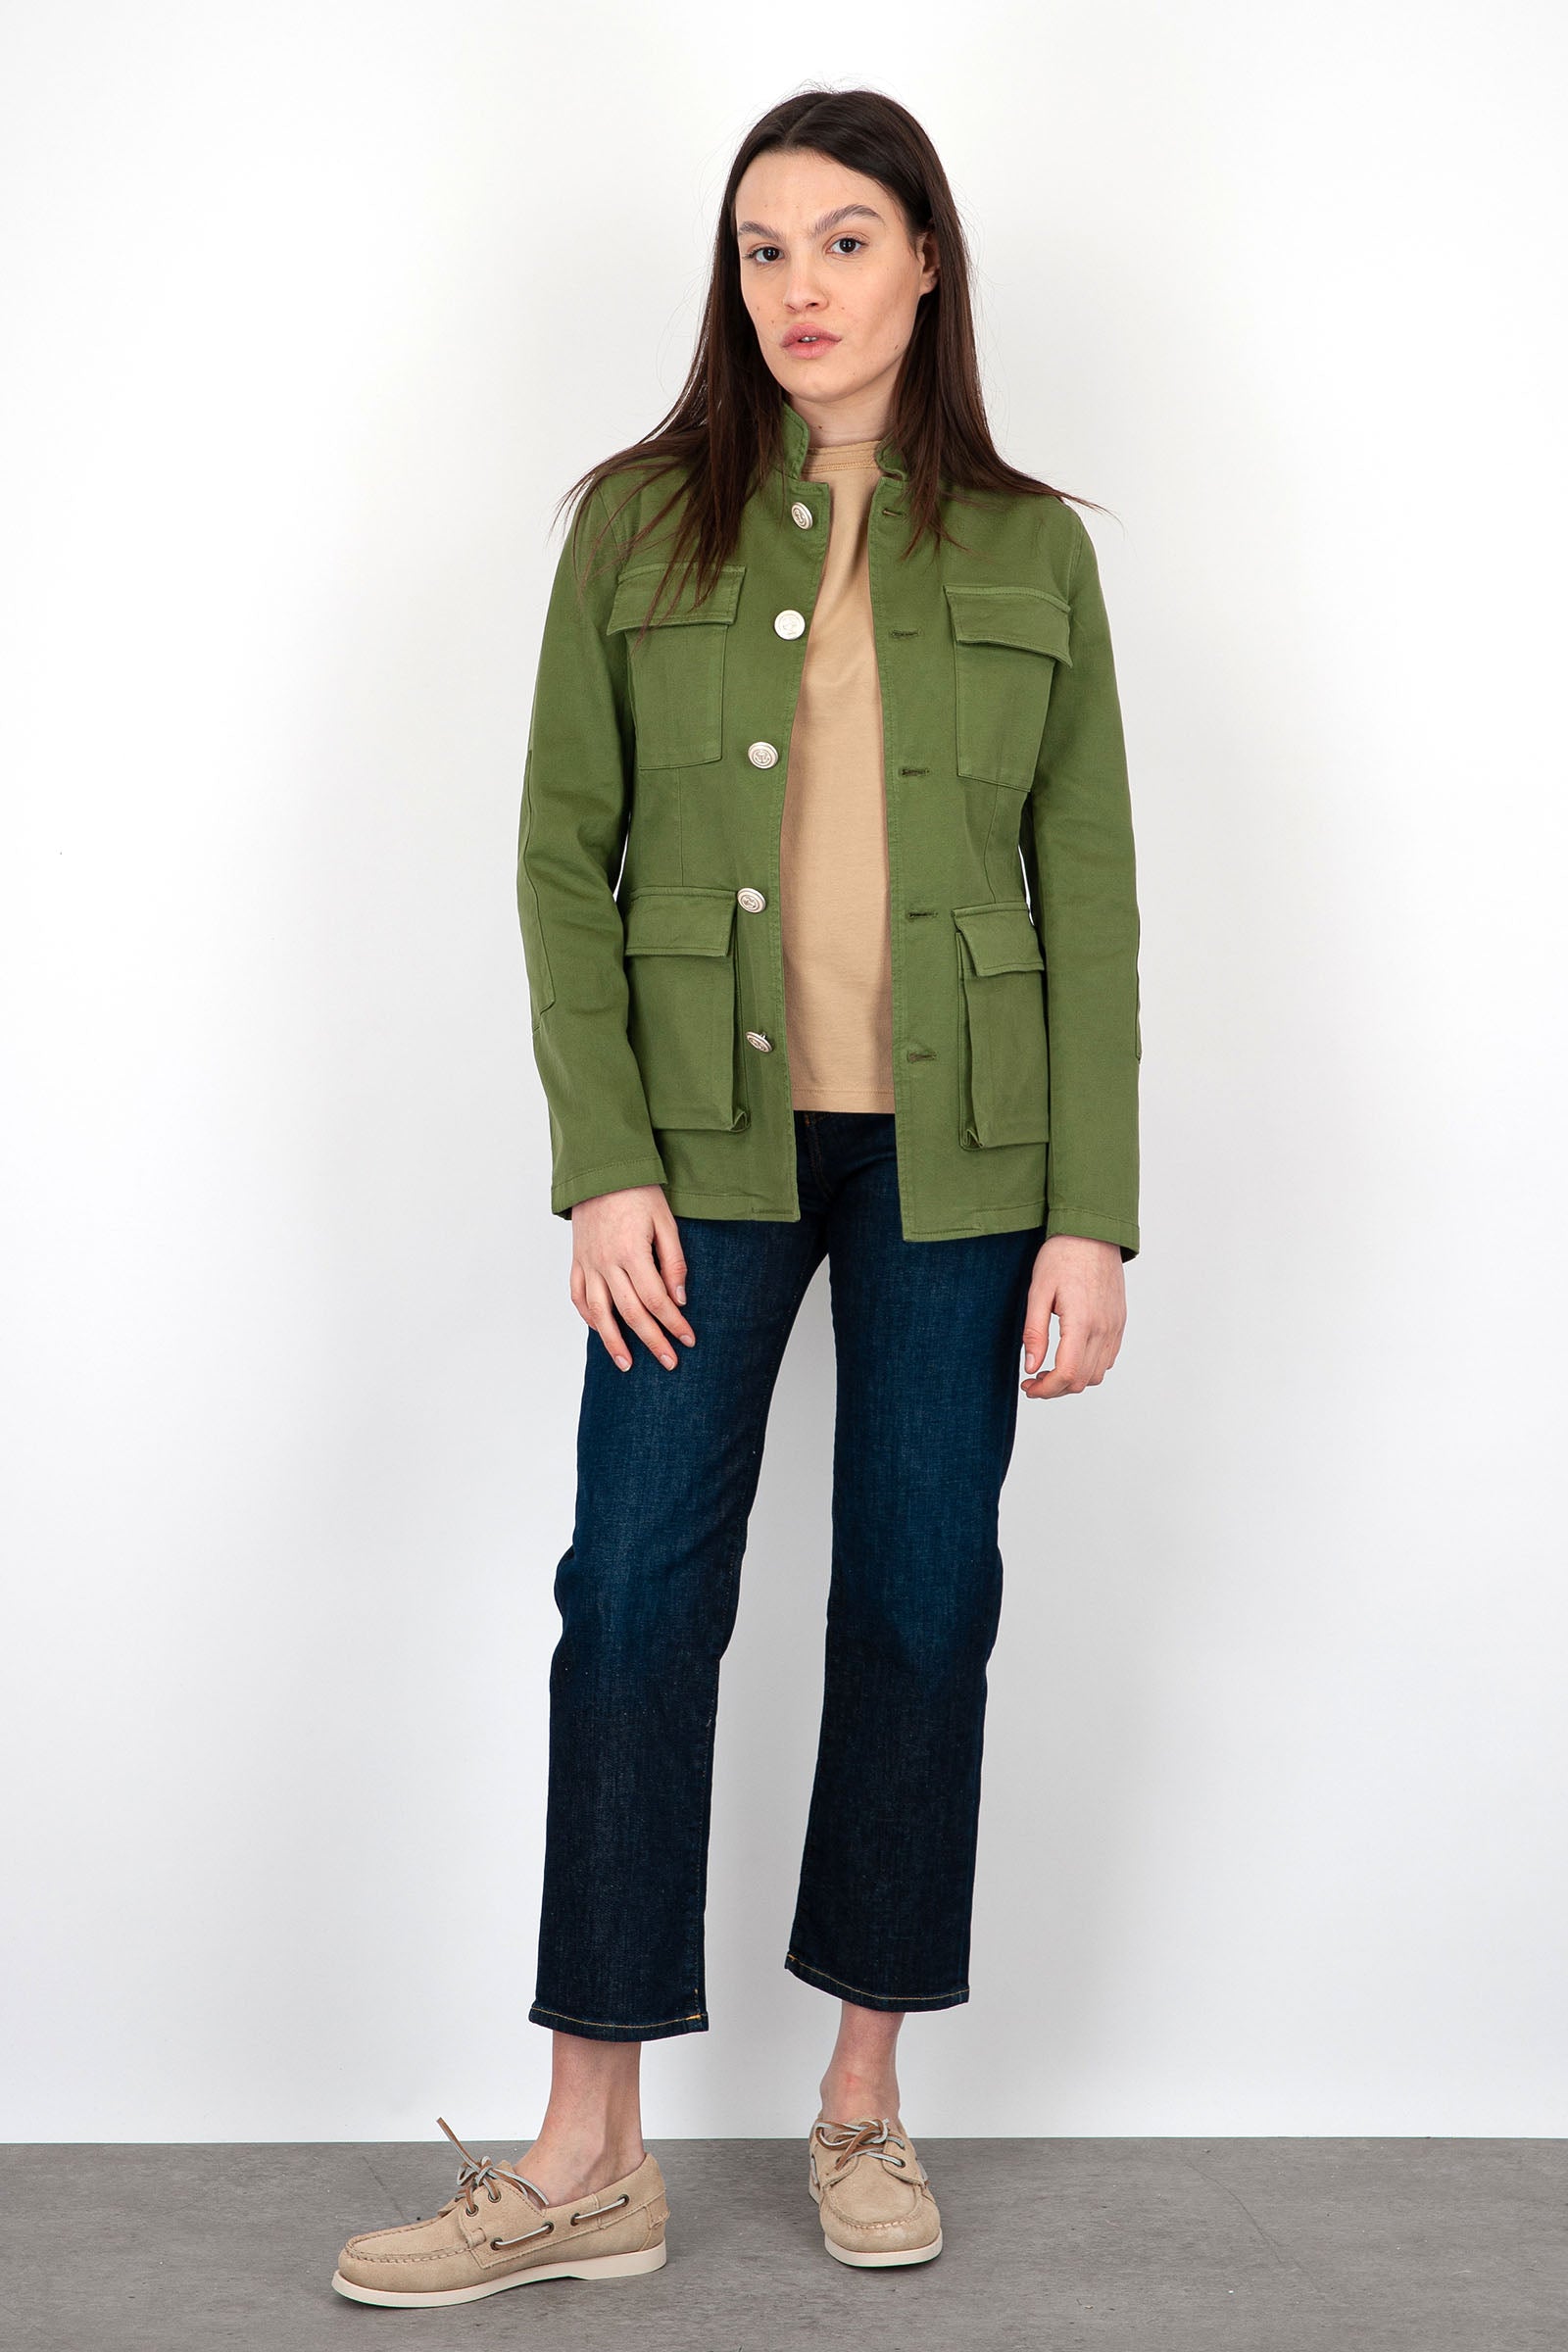 Department Five Green Military Cotton Field Jacket - 8